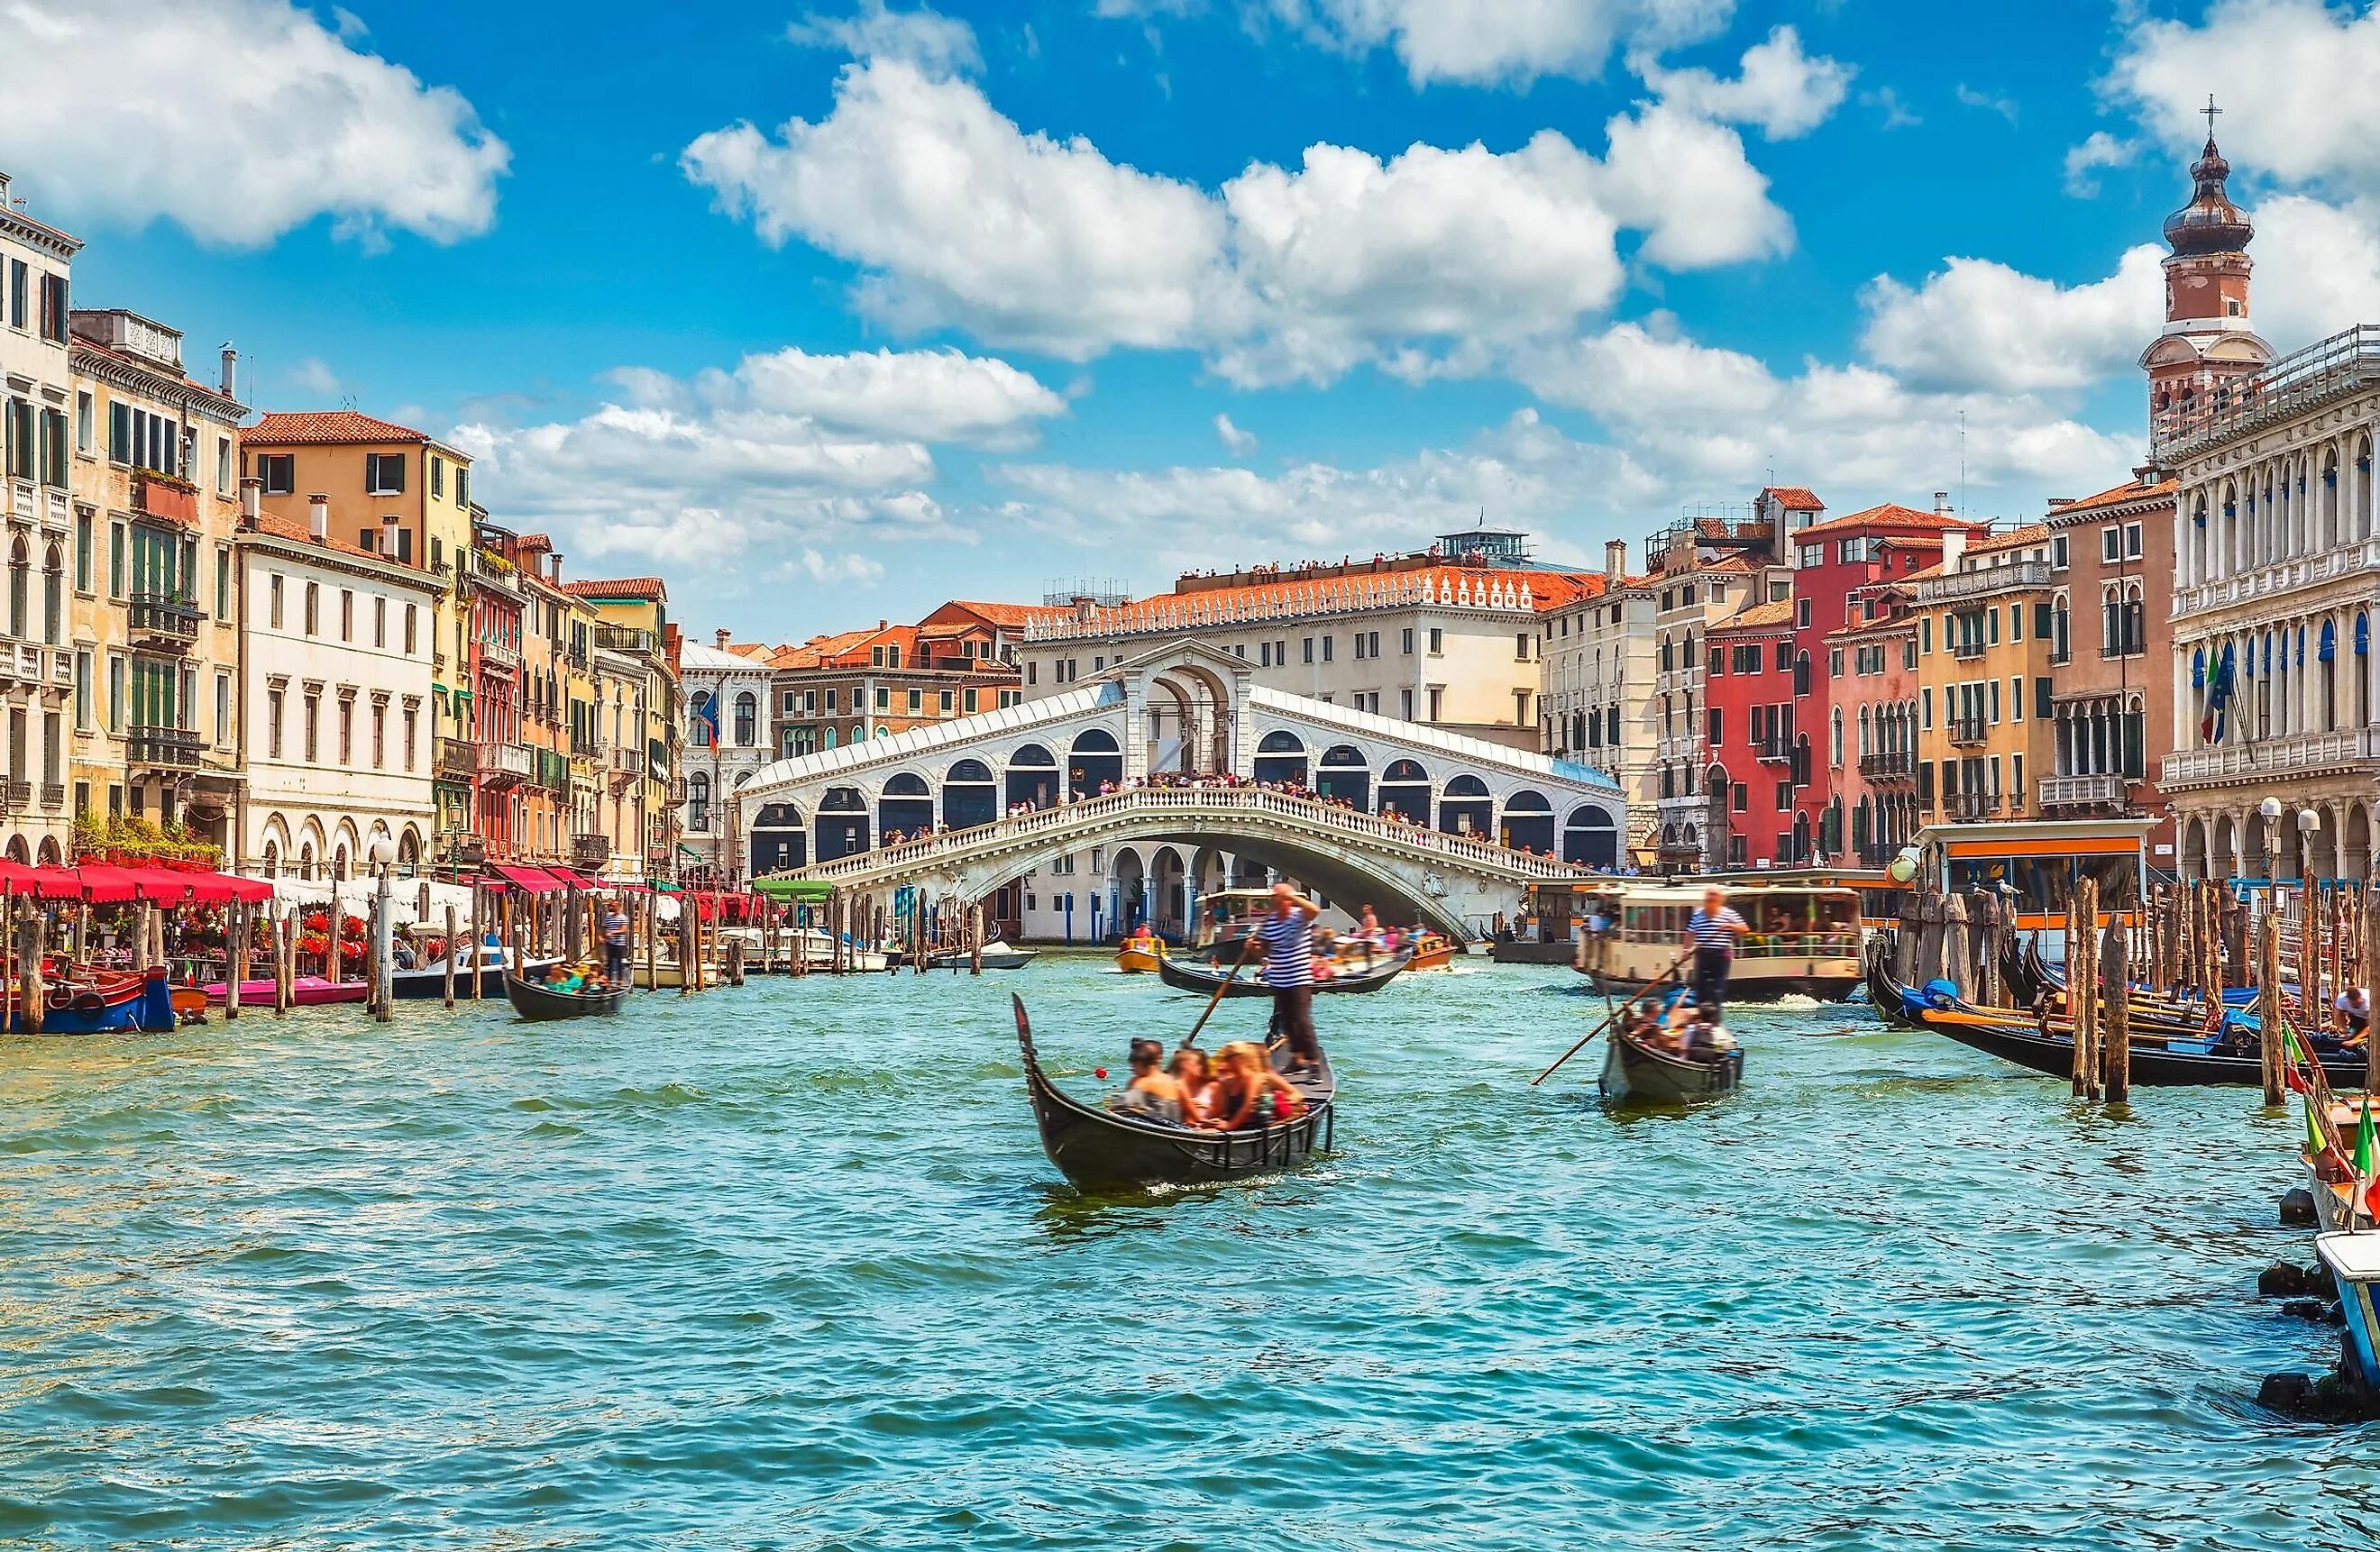 Grand canal